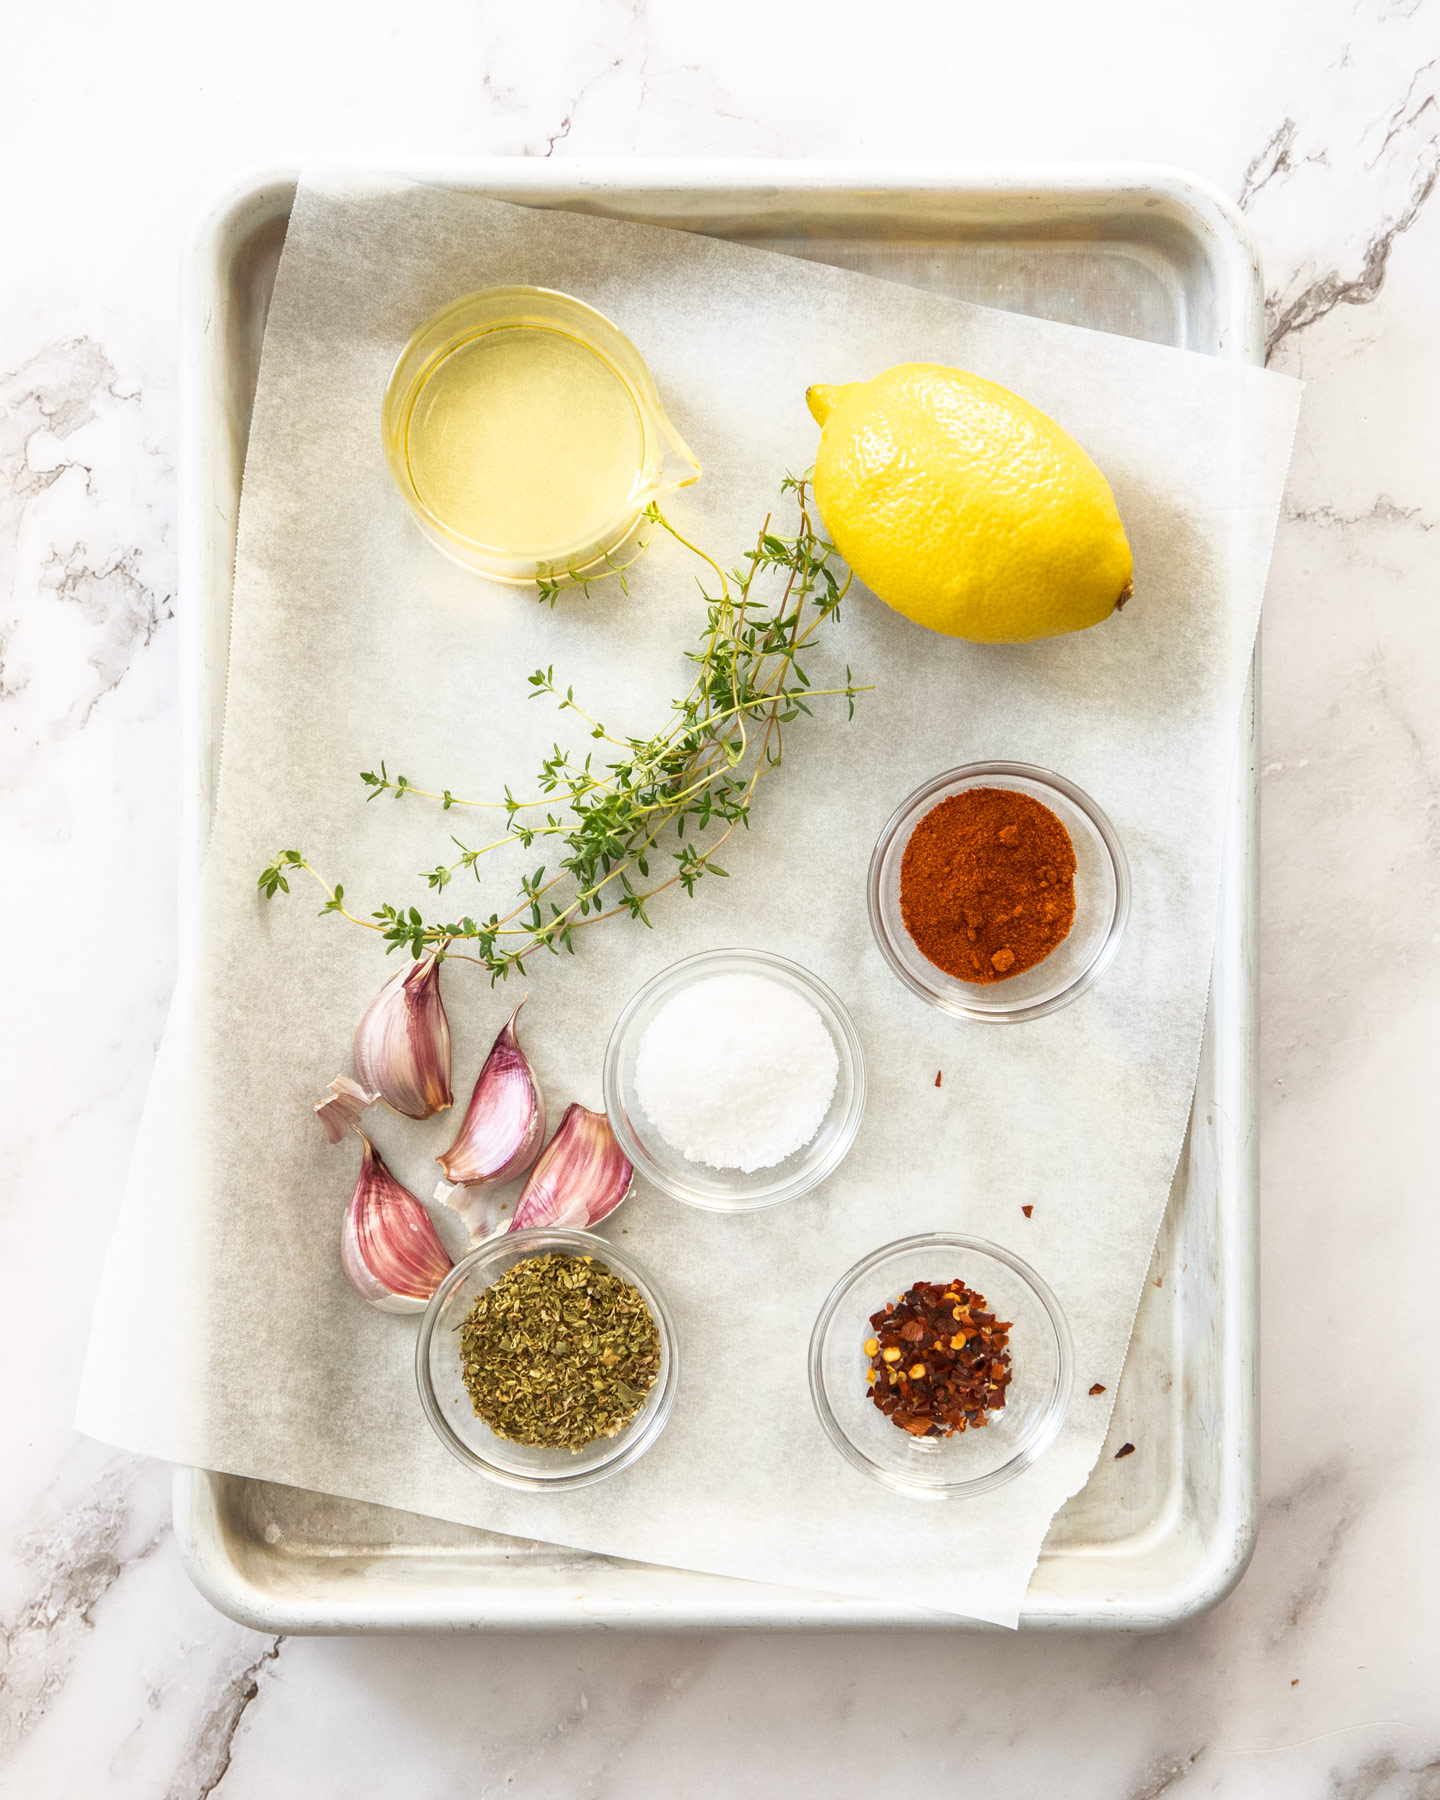 Ingredients for Greek marinade on a baking tray.